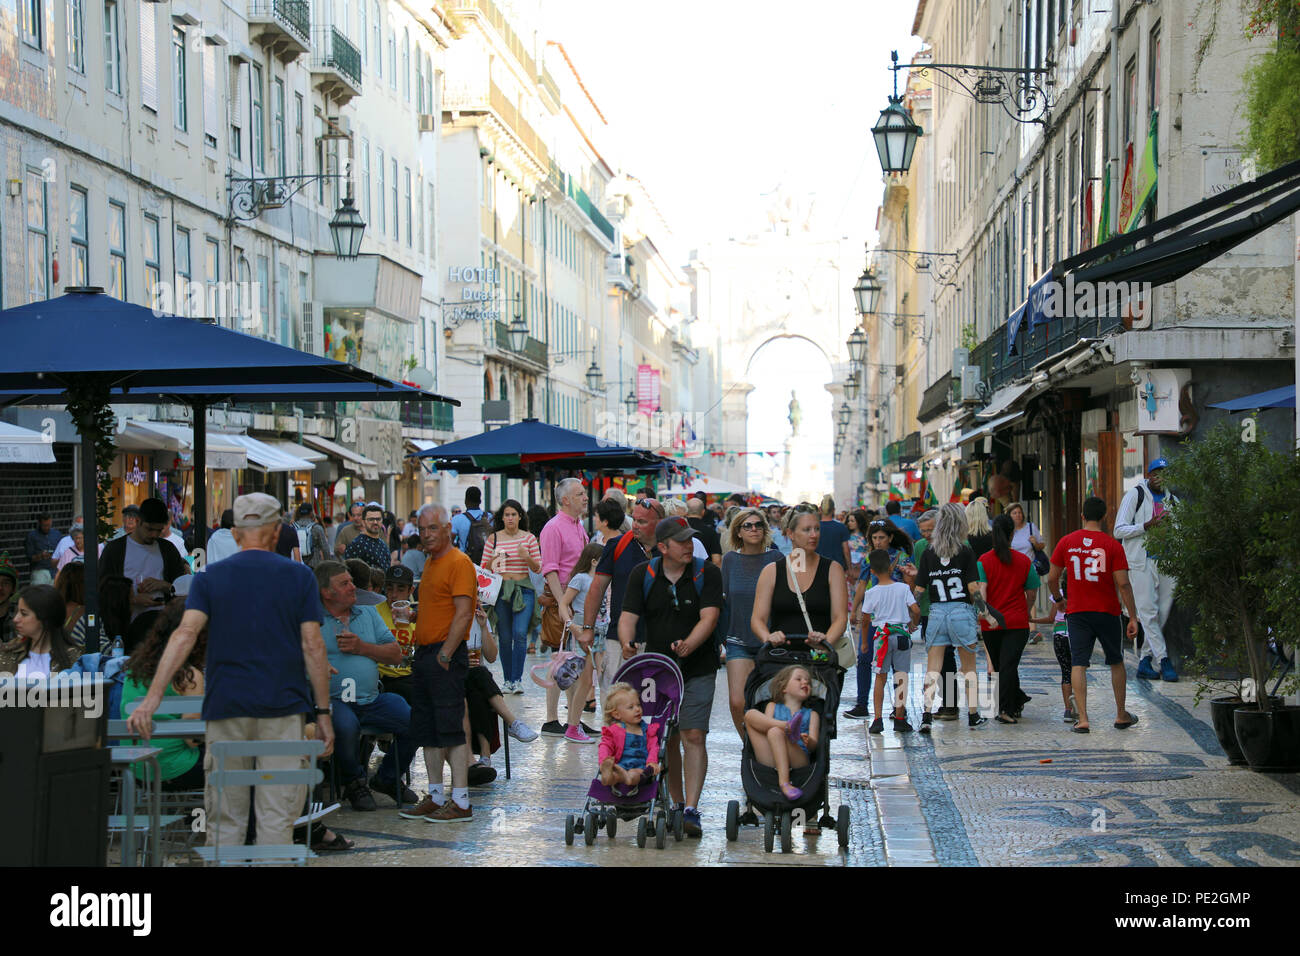 LISBON, PORTUGAL - JUNE 25, 2018: crowd of people in Rua Augusta street during summer in Lisbon, Portugal Stock Photo